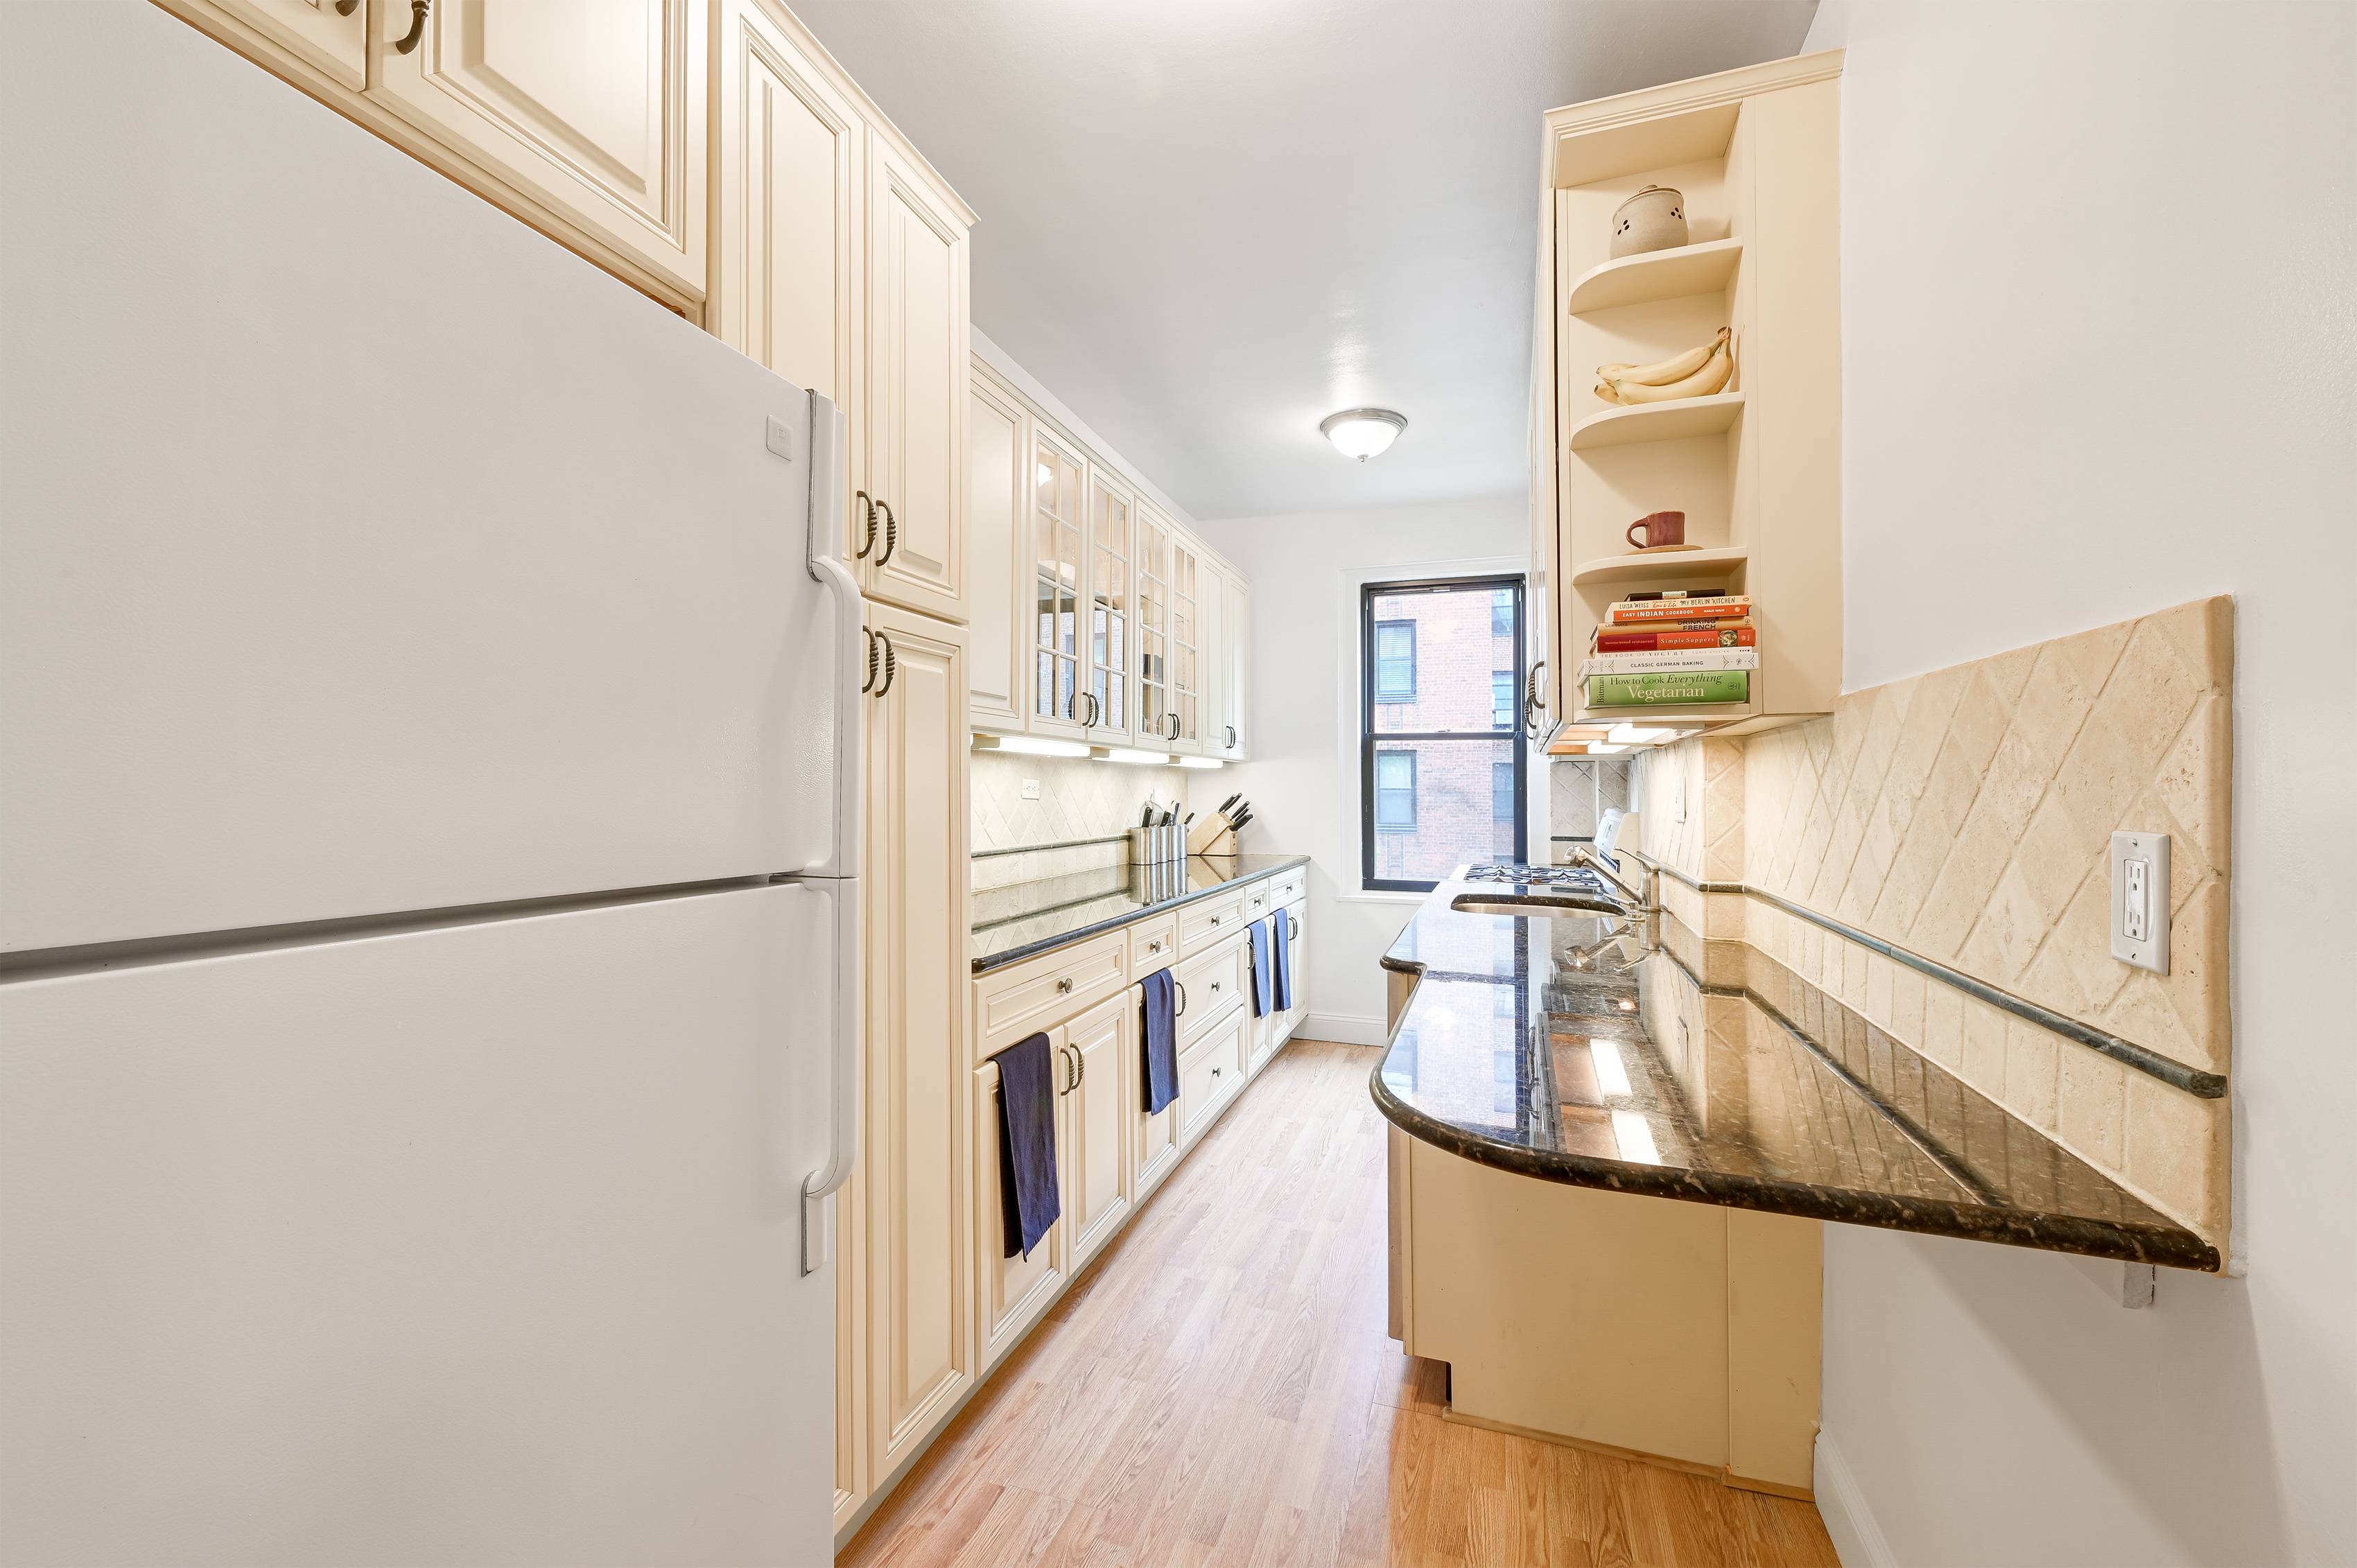 62 Park Terrace W A37 is a 2 Bedroom 1 Bathroom coop apartment with a serene feel.